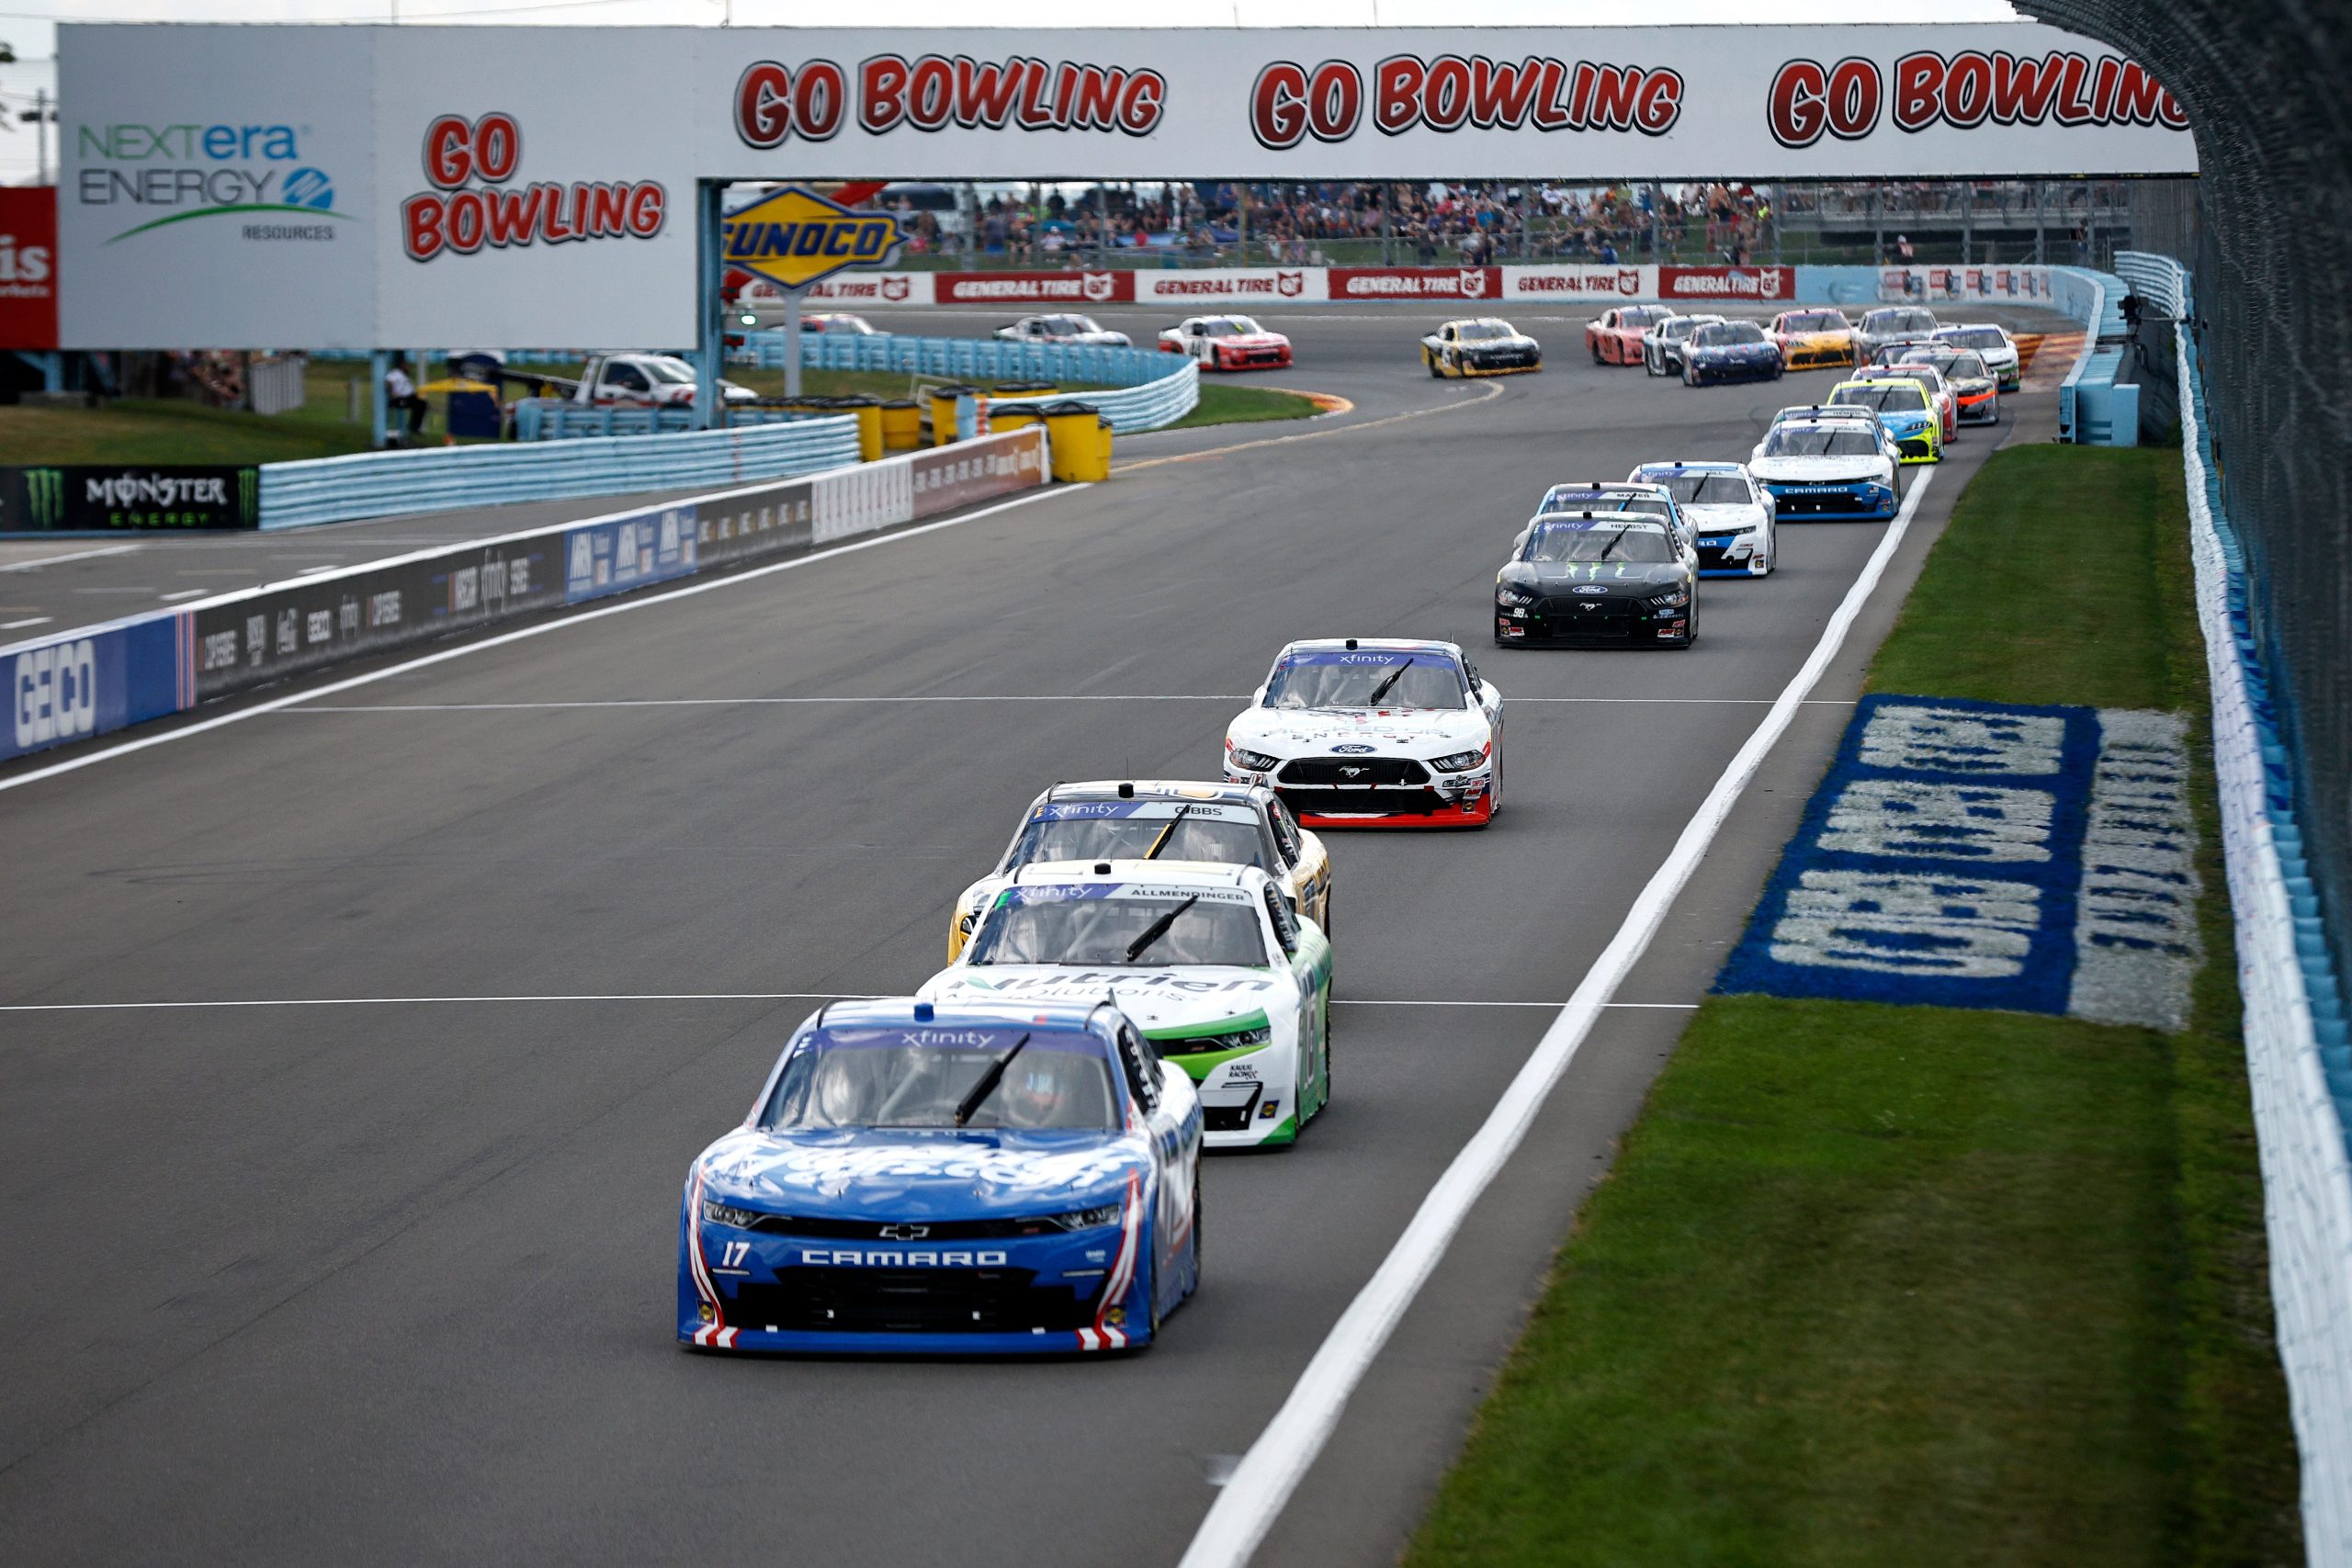 WATKINS GLEN, NEW YORK - AUGUST 20: William Byron, driver of the #17 HendrickCars.com Chevrolet, leads the field during the NASCAR Xfinity Series Sunoco Go Rewards 200 at The Glen at Watkins Glen International on August 20, 2022 in Watkins Glen, New York. (Photo by Sean Gardner/Getty Images)